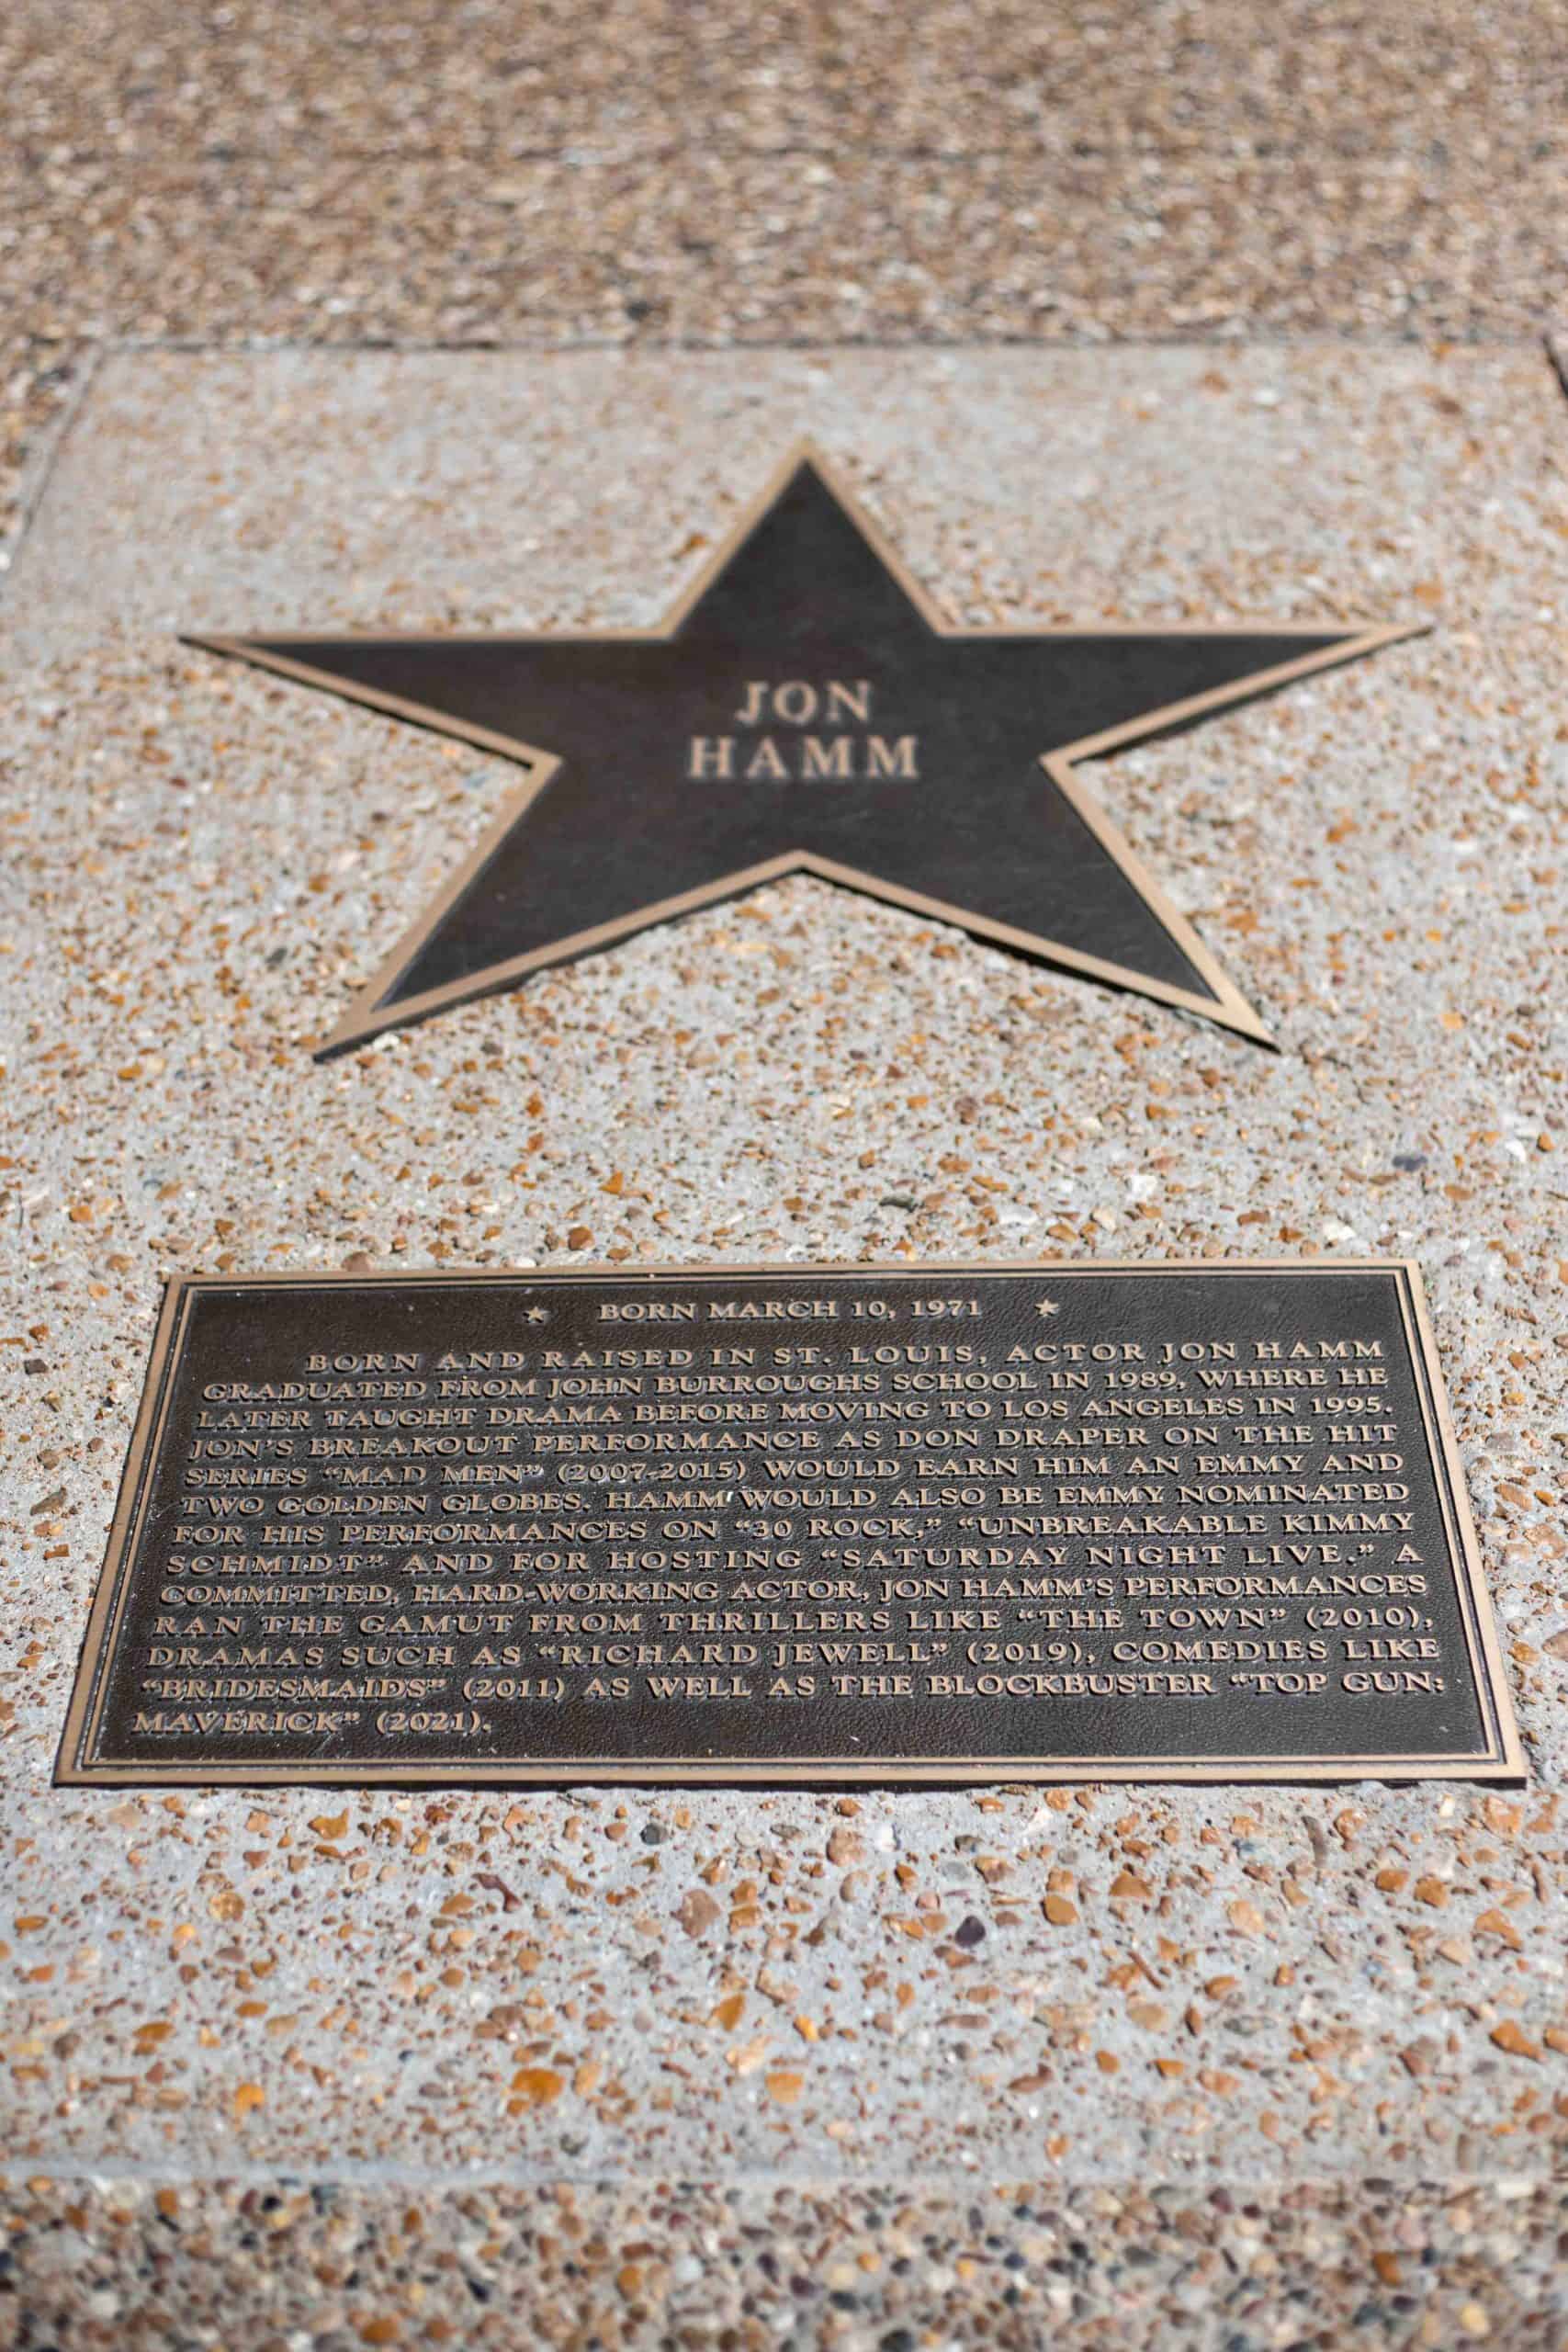 Jon Hamm custom casted plaque with informational bio section